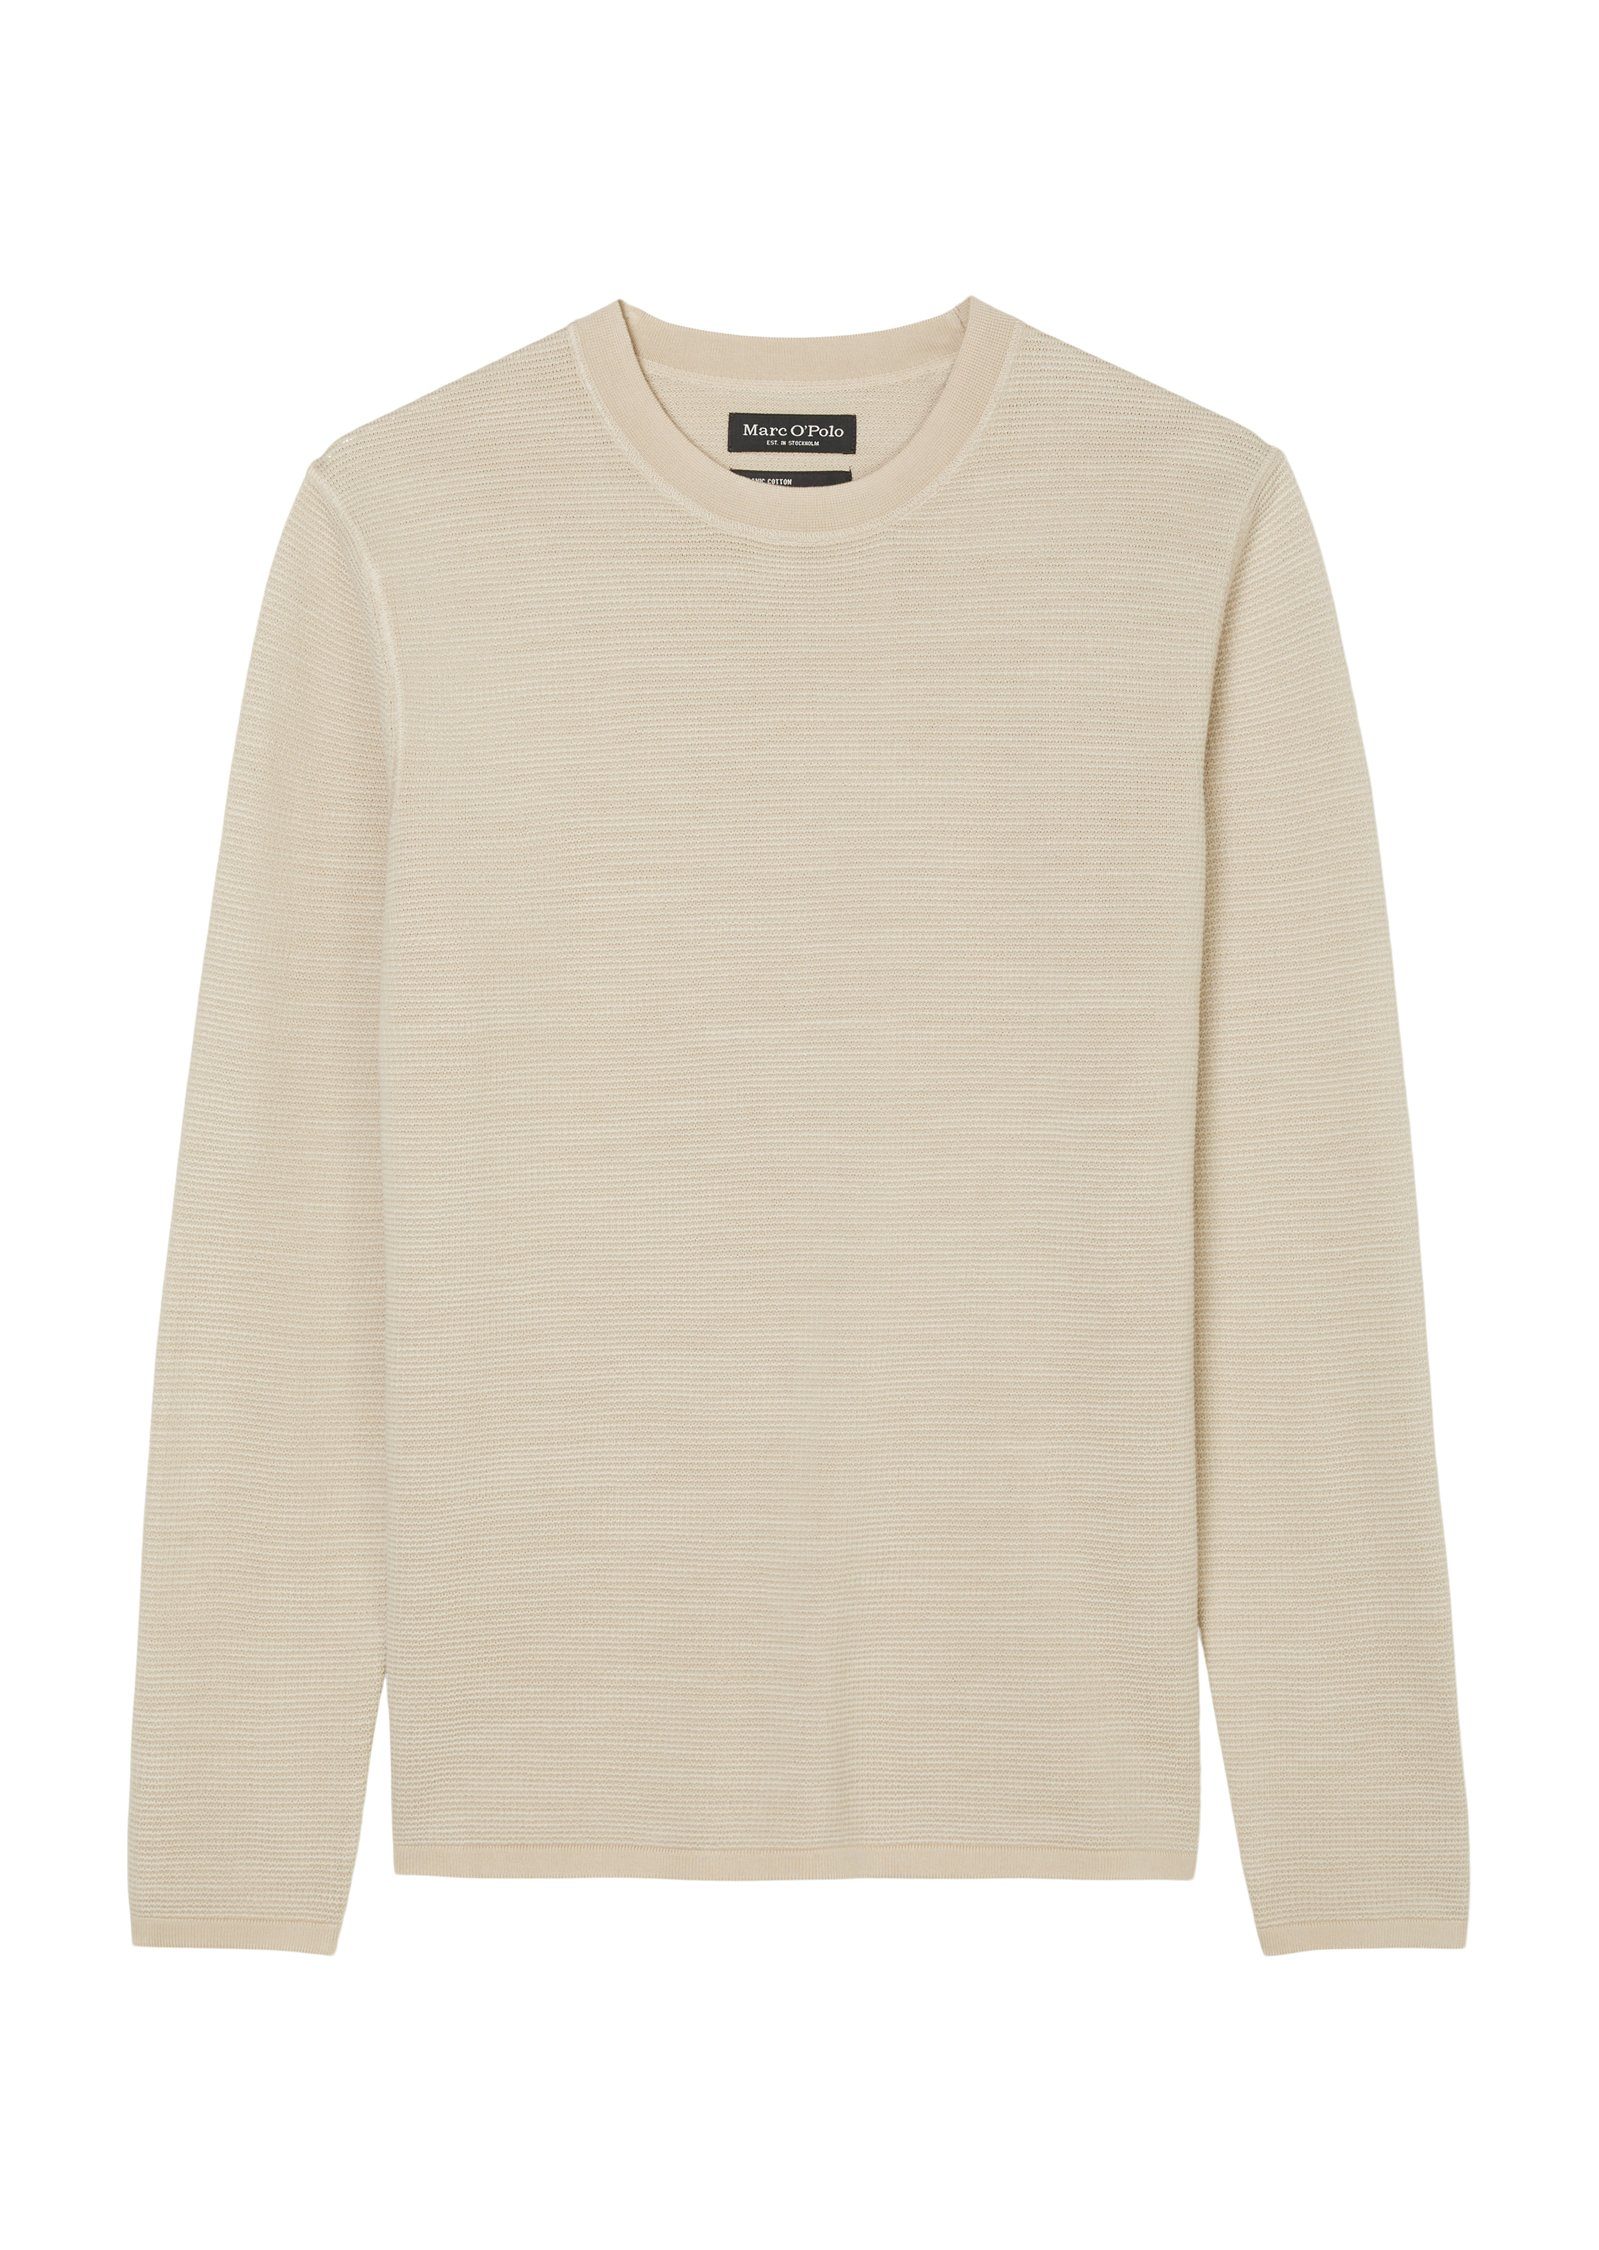 structure crew with Marc Pullover, Sweatshirt neck, O'Polo